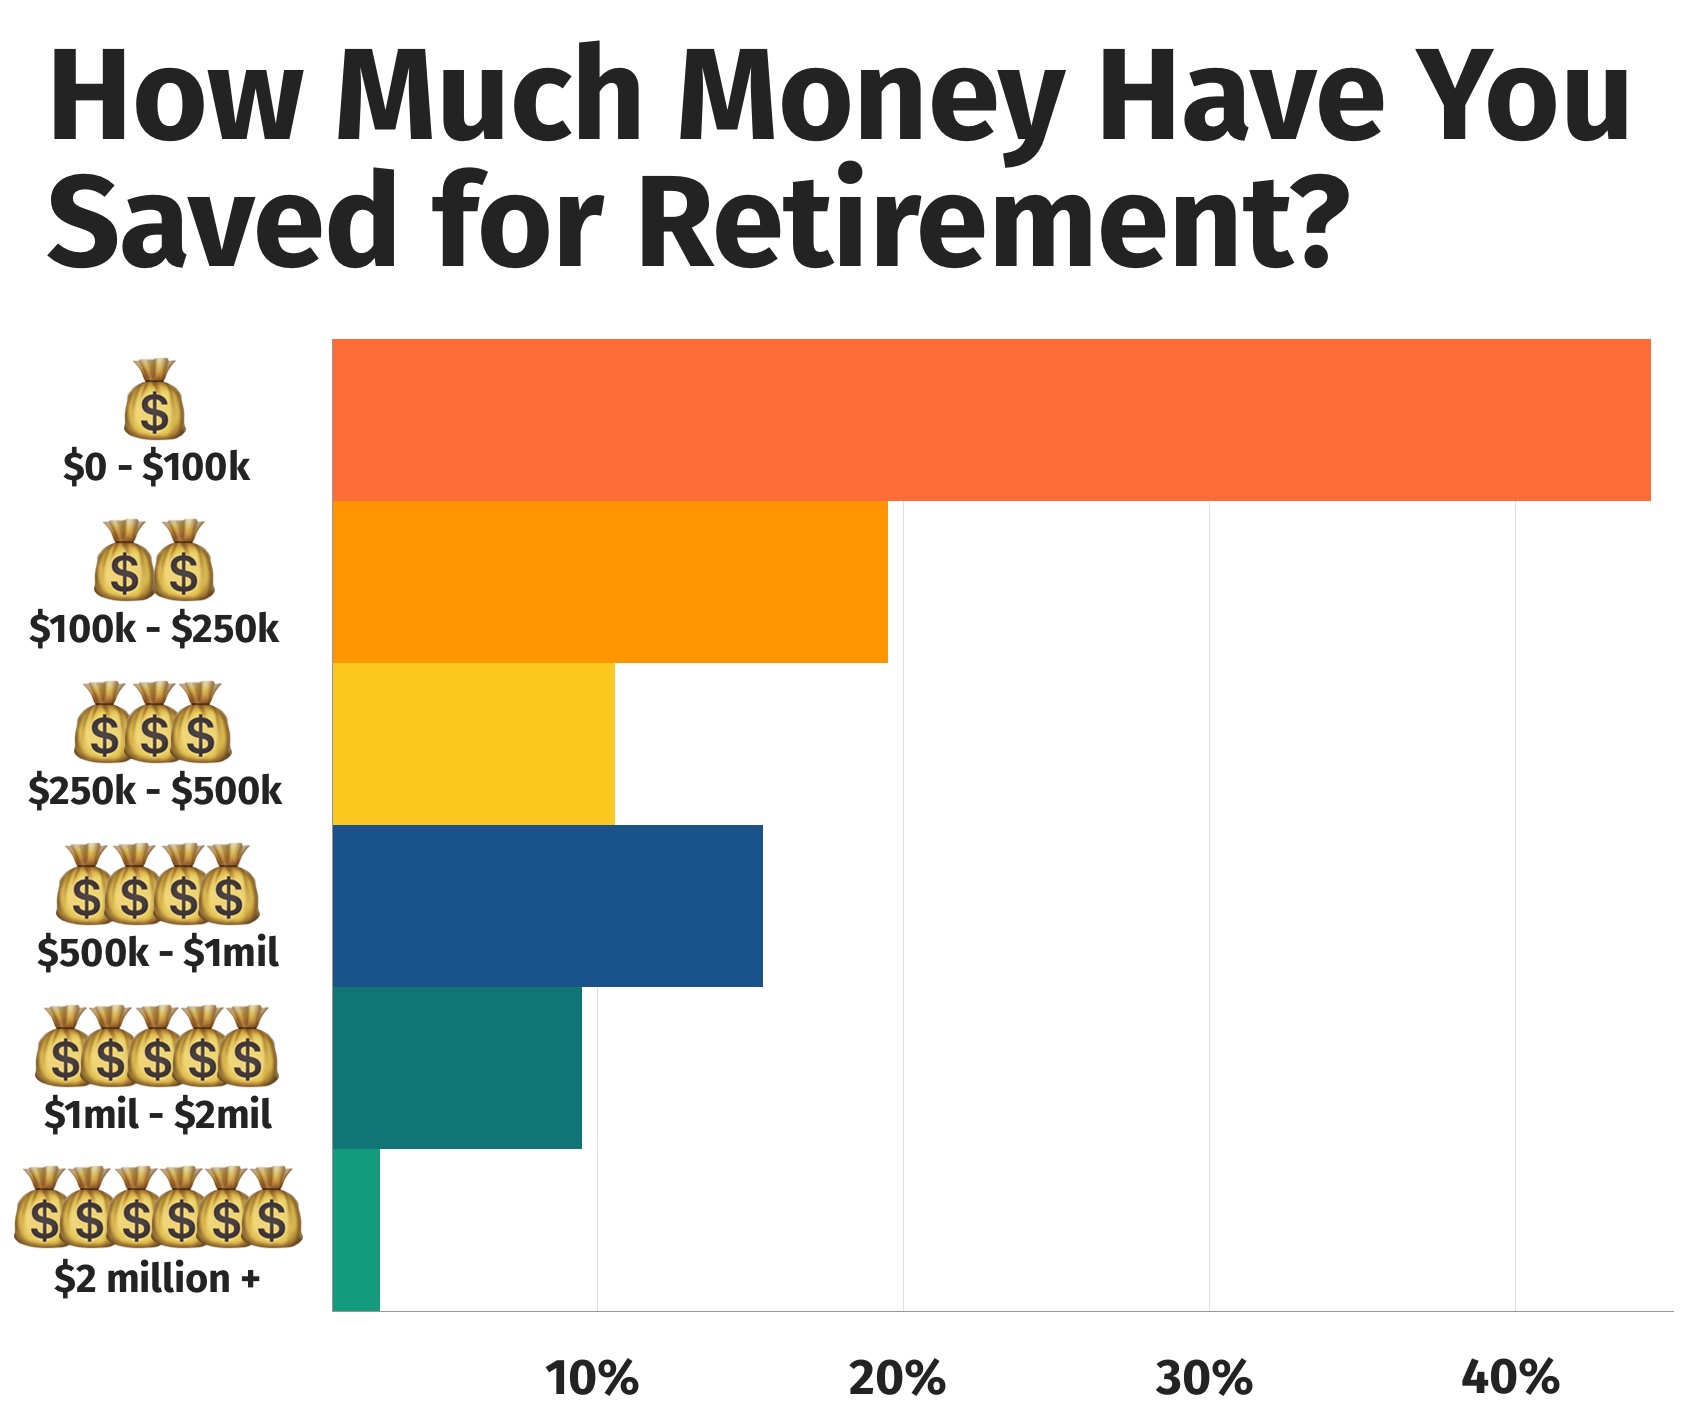 How much money have you saved for retirement?